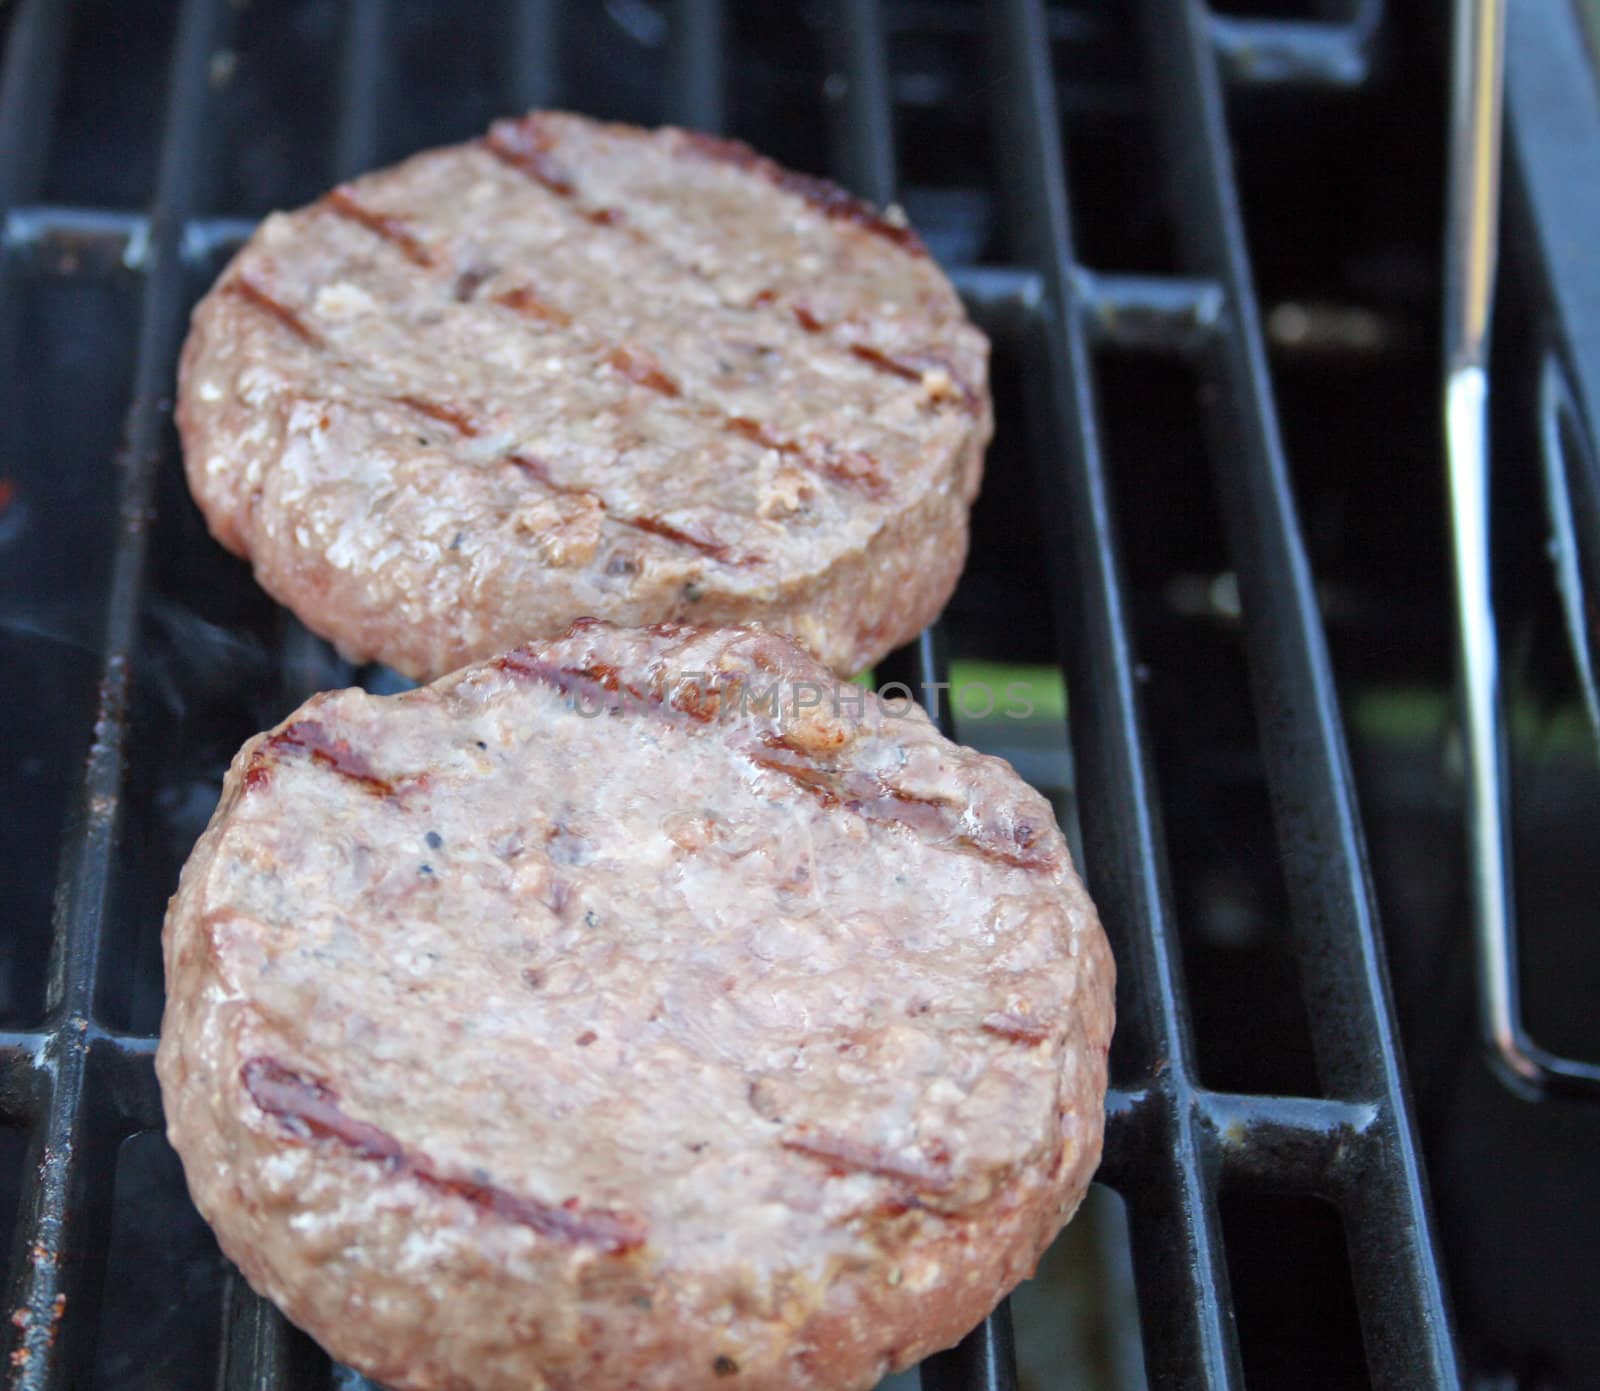 burgers on the grill